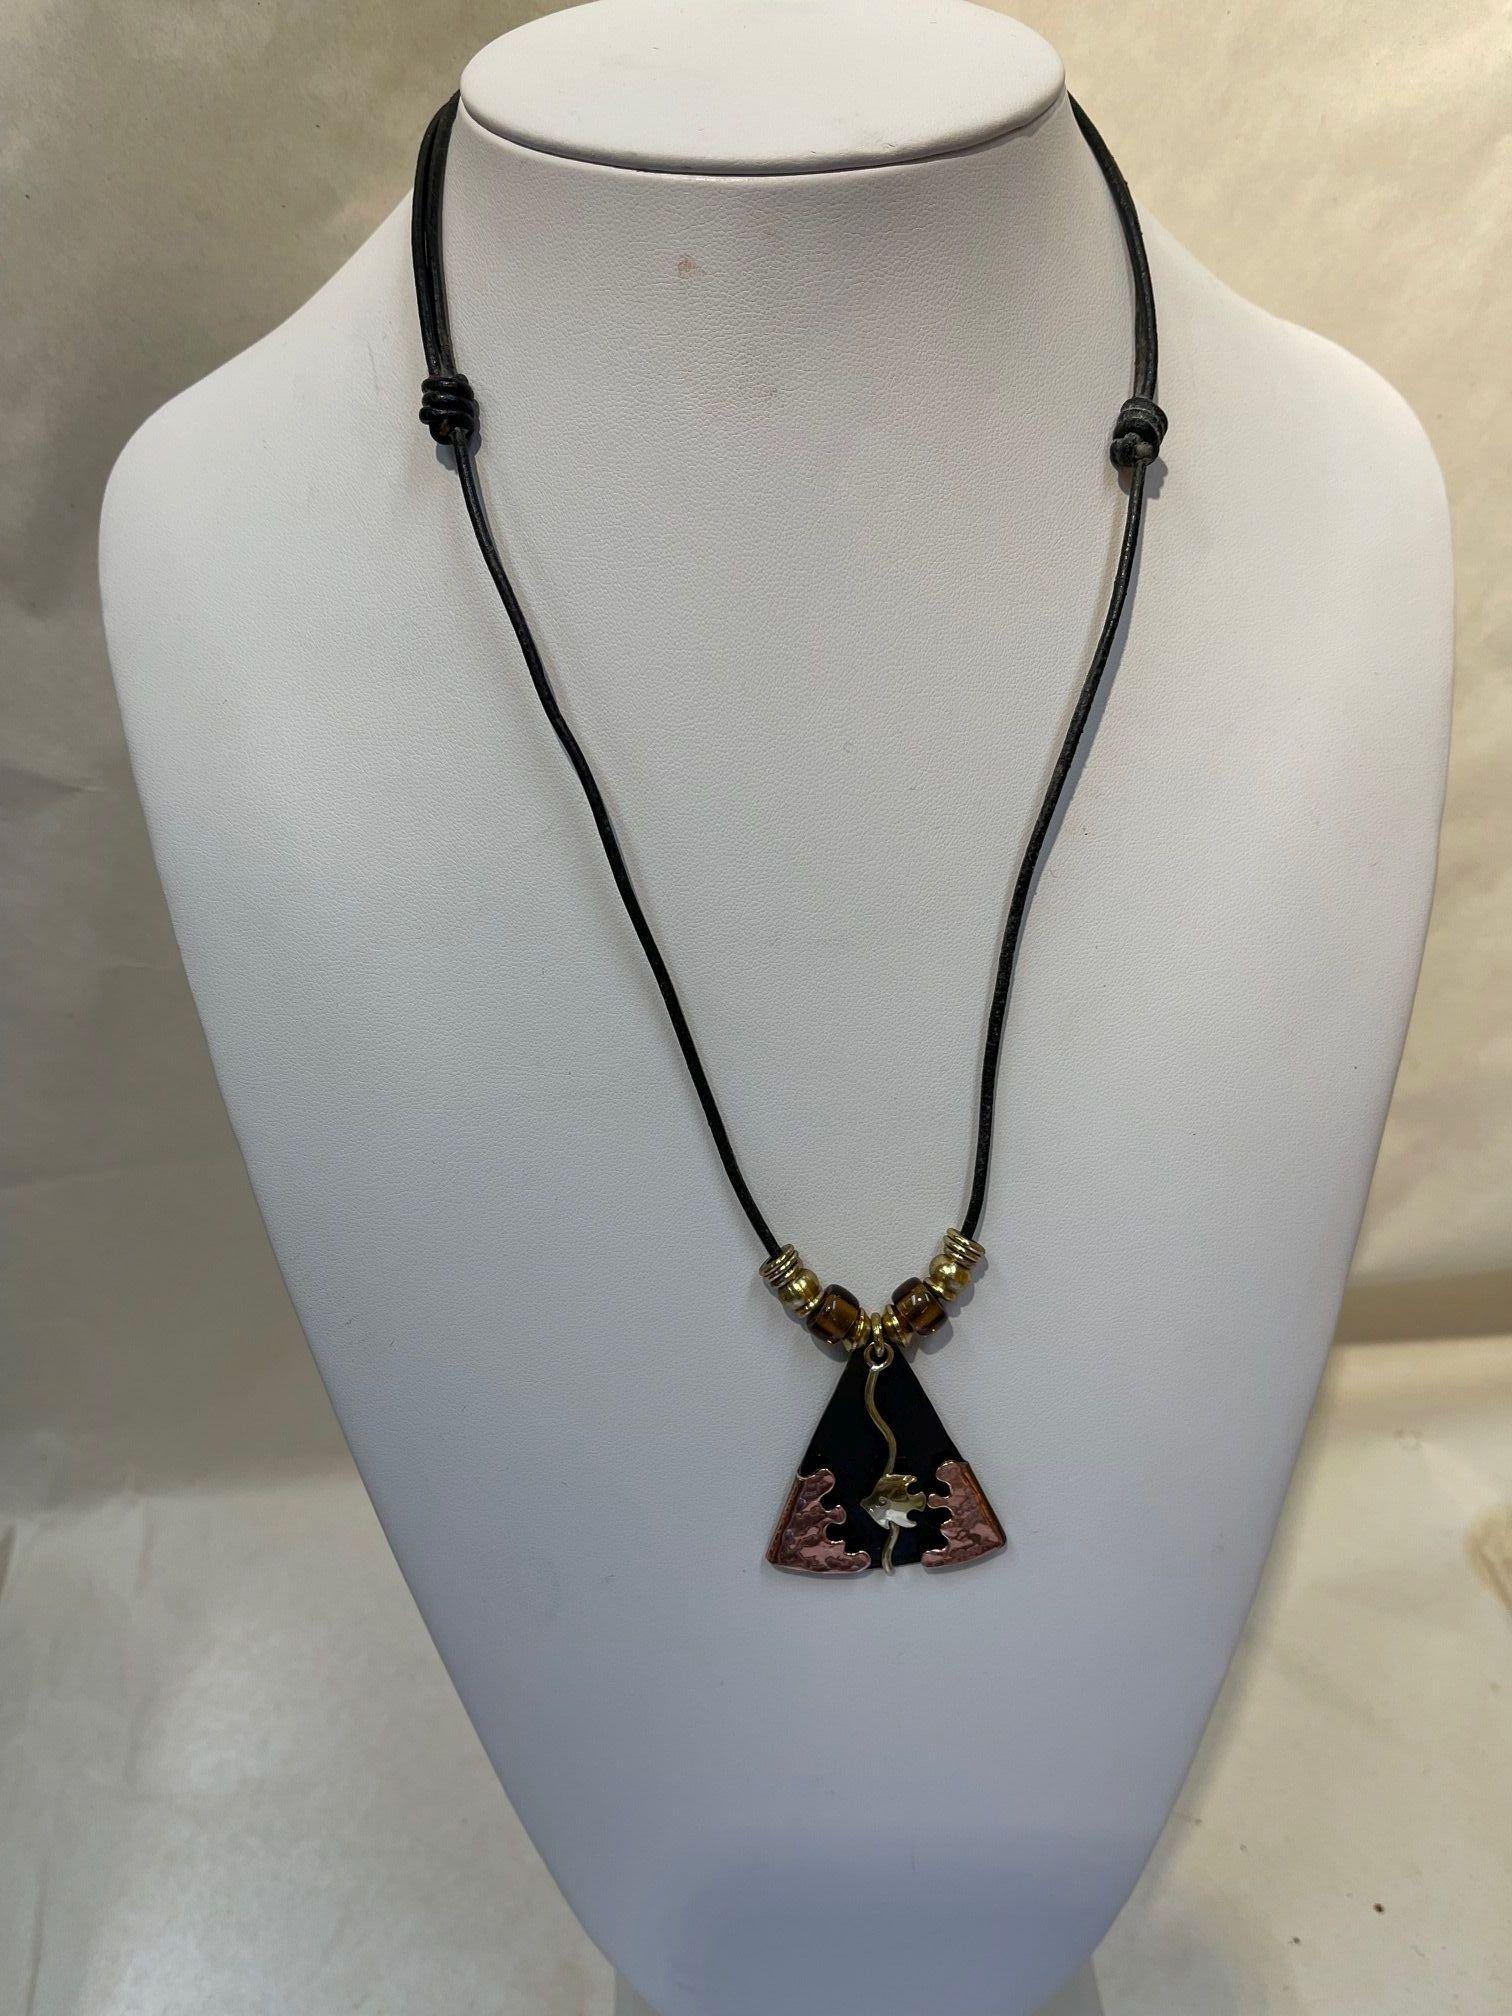 Vintage Mid Century Modern Designer Signed Abstract Pendant Necklace In Excellent Condition For Sale In Montreal, QC